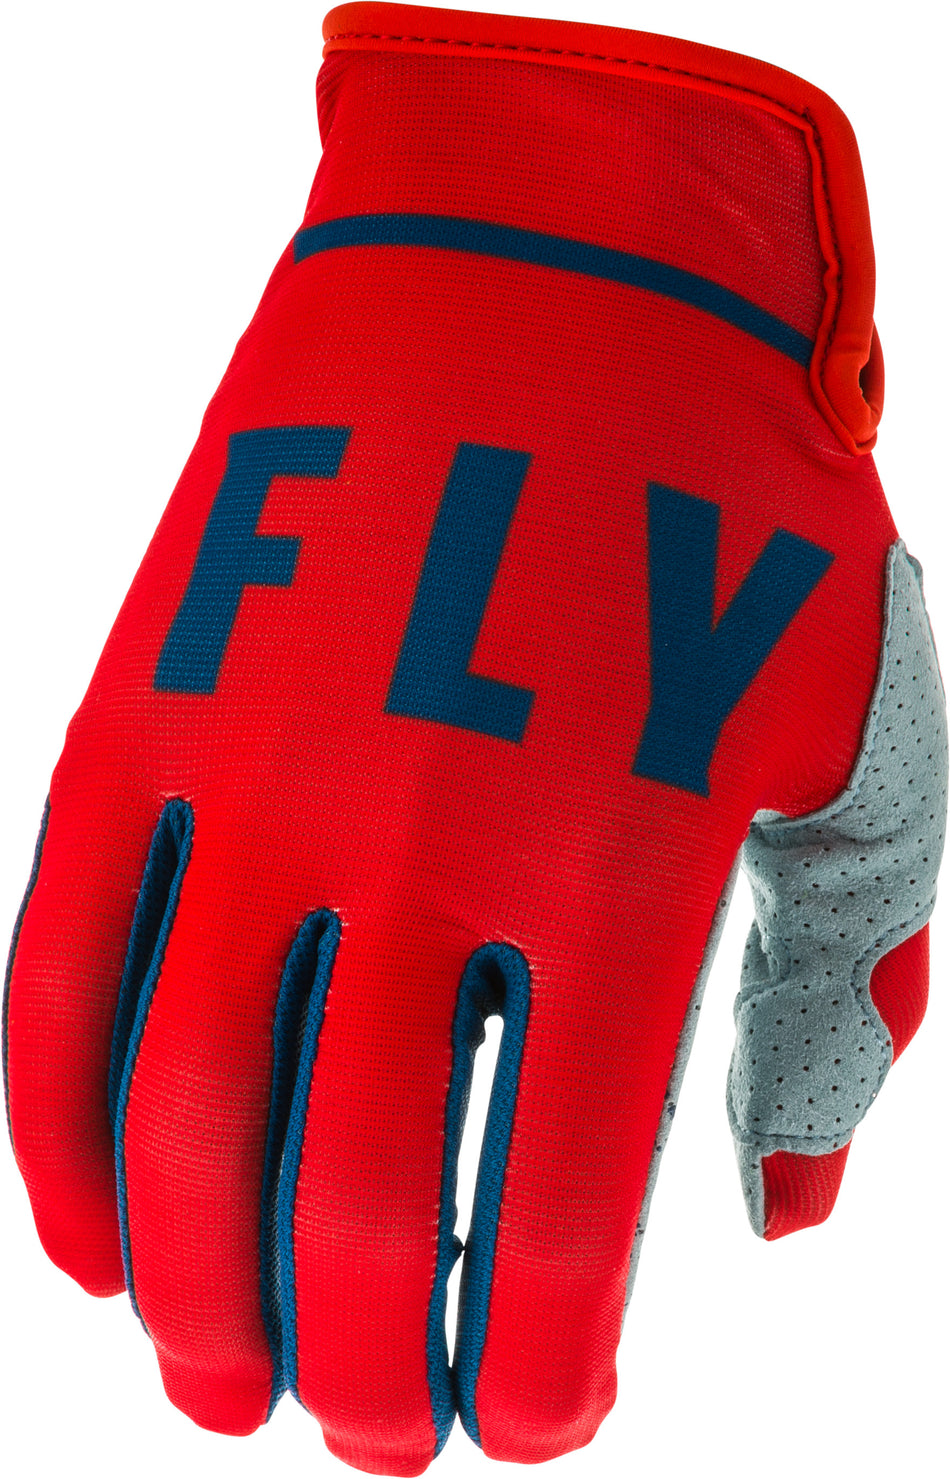 FLY RACING Lite Gloves Red/Slate/Navy Sz 08 373-71208